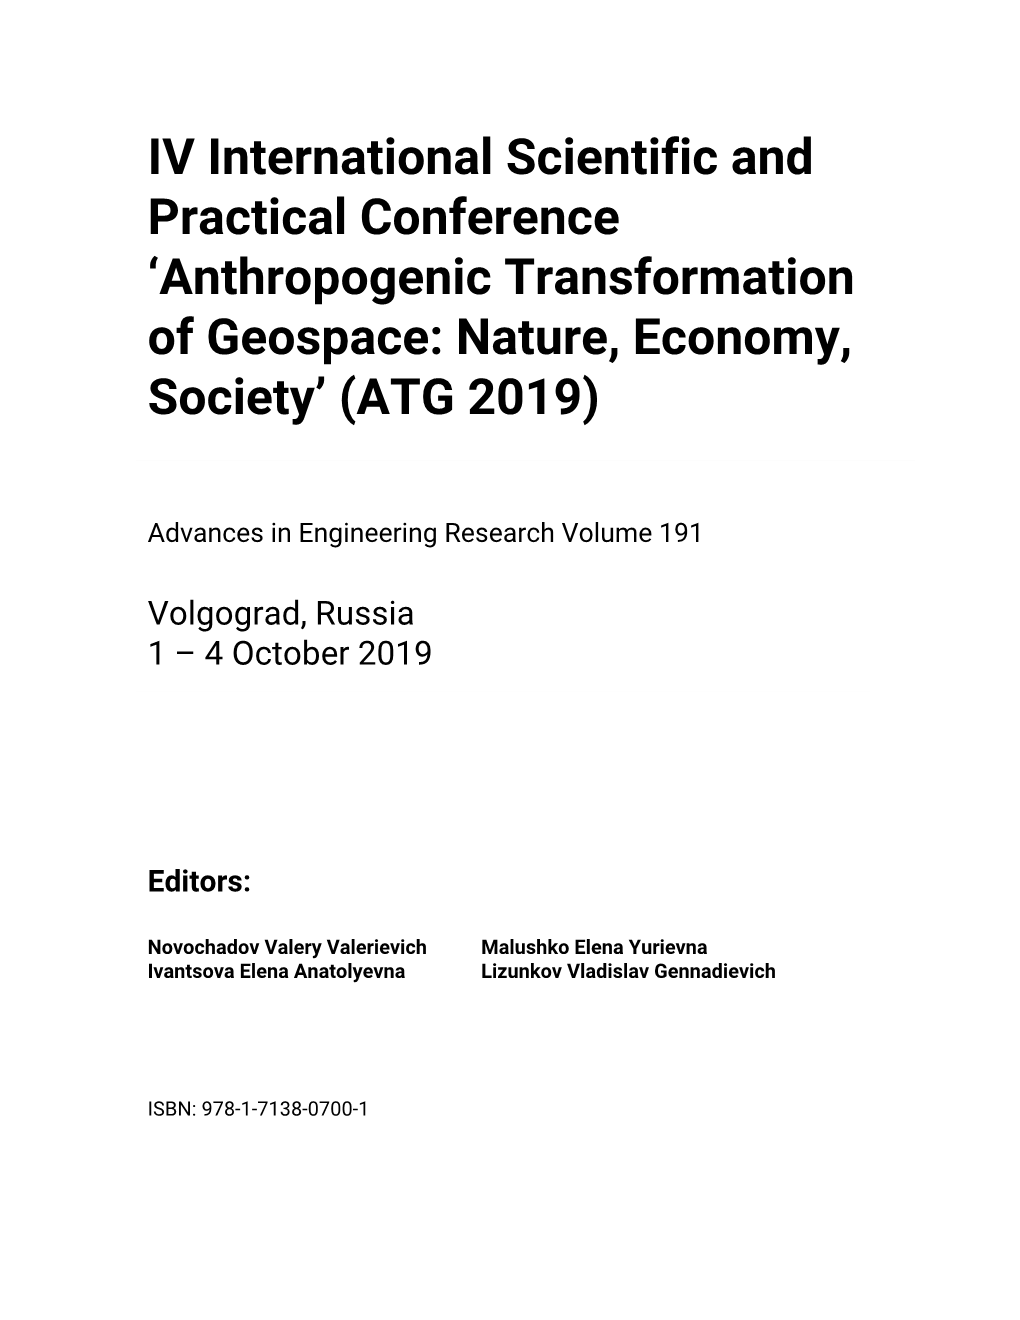 IV International Scientific and Practical Conference 'Anthropogenic